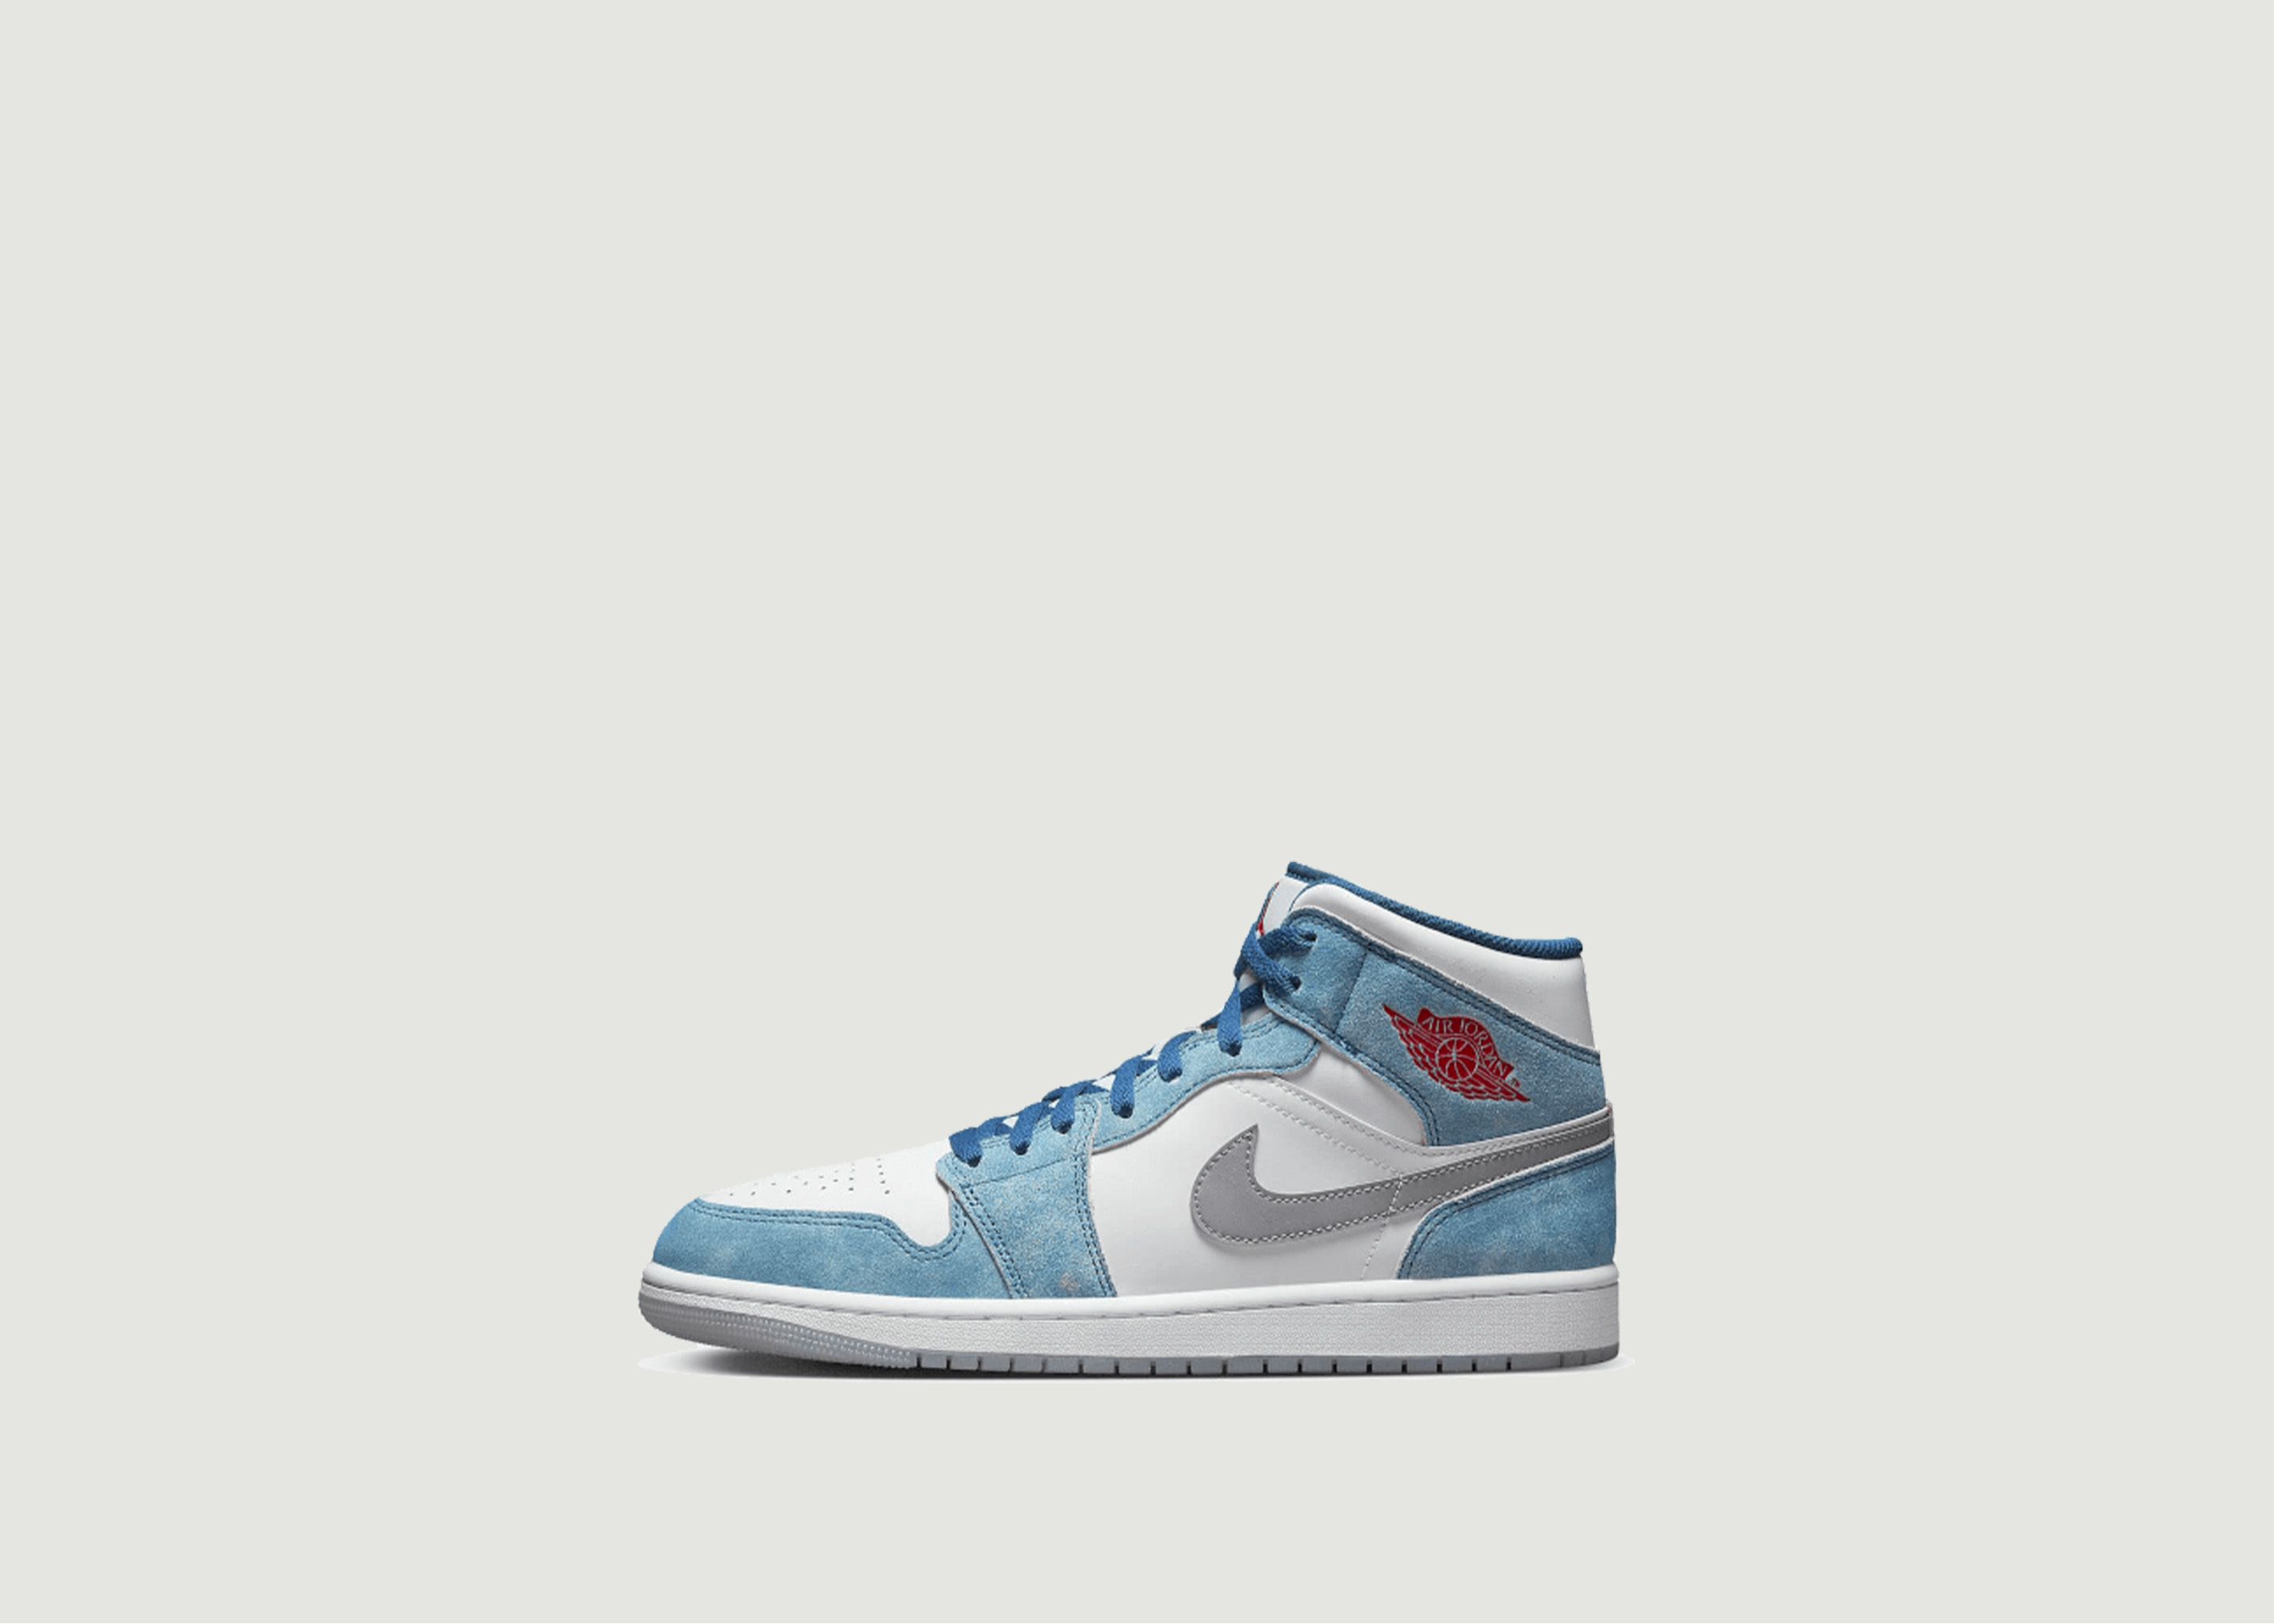 Air Jordan 1 Mid French Blue Fire Red (GS) - Nike